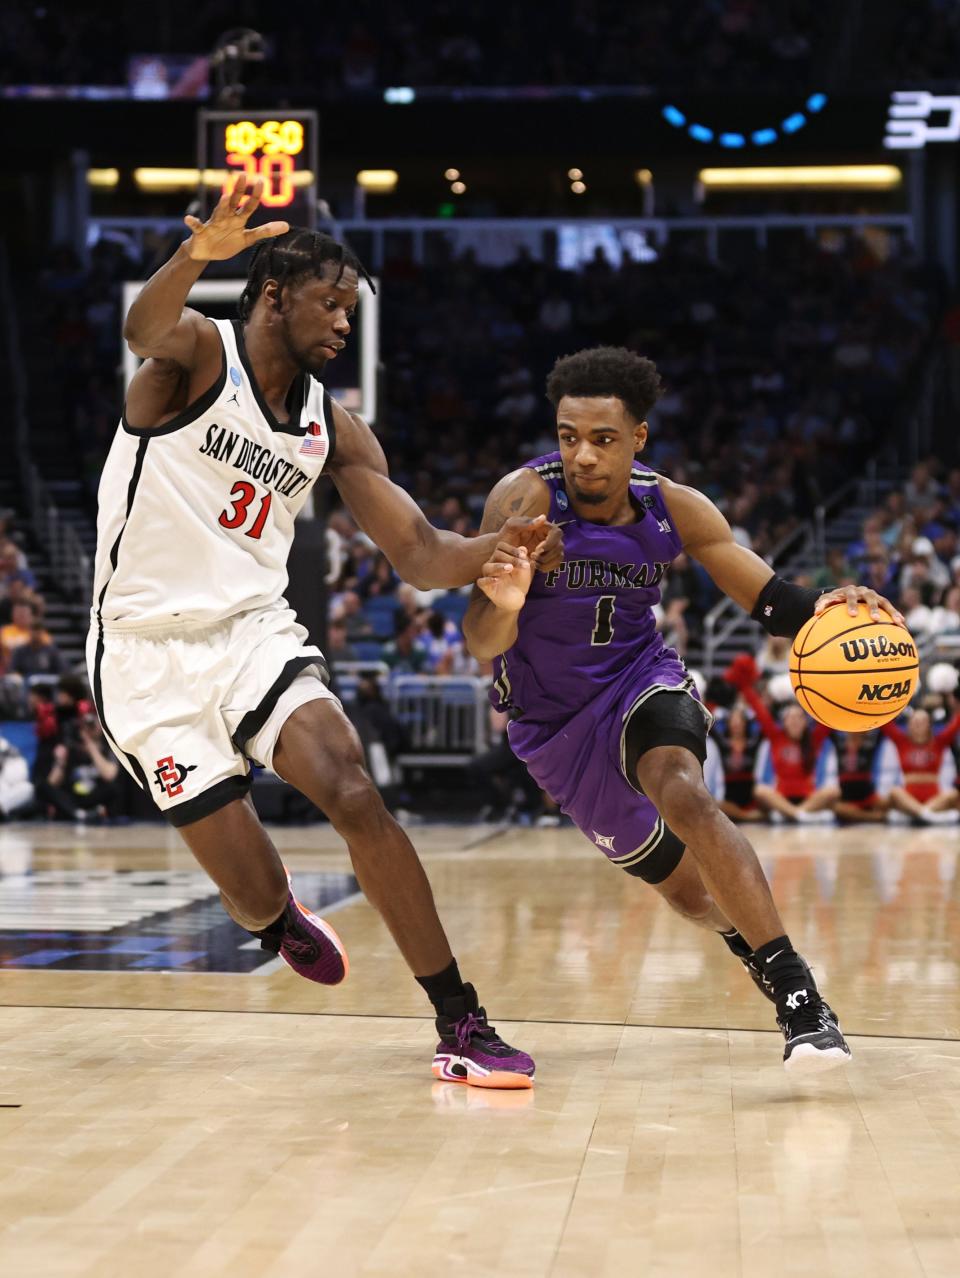 Mar 18, 2023; Orlando, FL, USA; Furman Paladins guard JP Pegues (1) drives against San Diego State Aztecs forward Nathan Mensah (31) during the second half in the second round of the 2023 NCAA Tournament at Legacy Arena. Mandatory Credit: Matt Pendleton-USA TODAY Sports